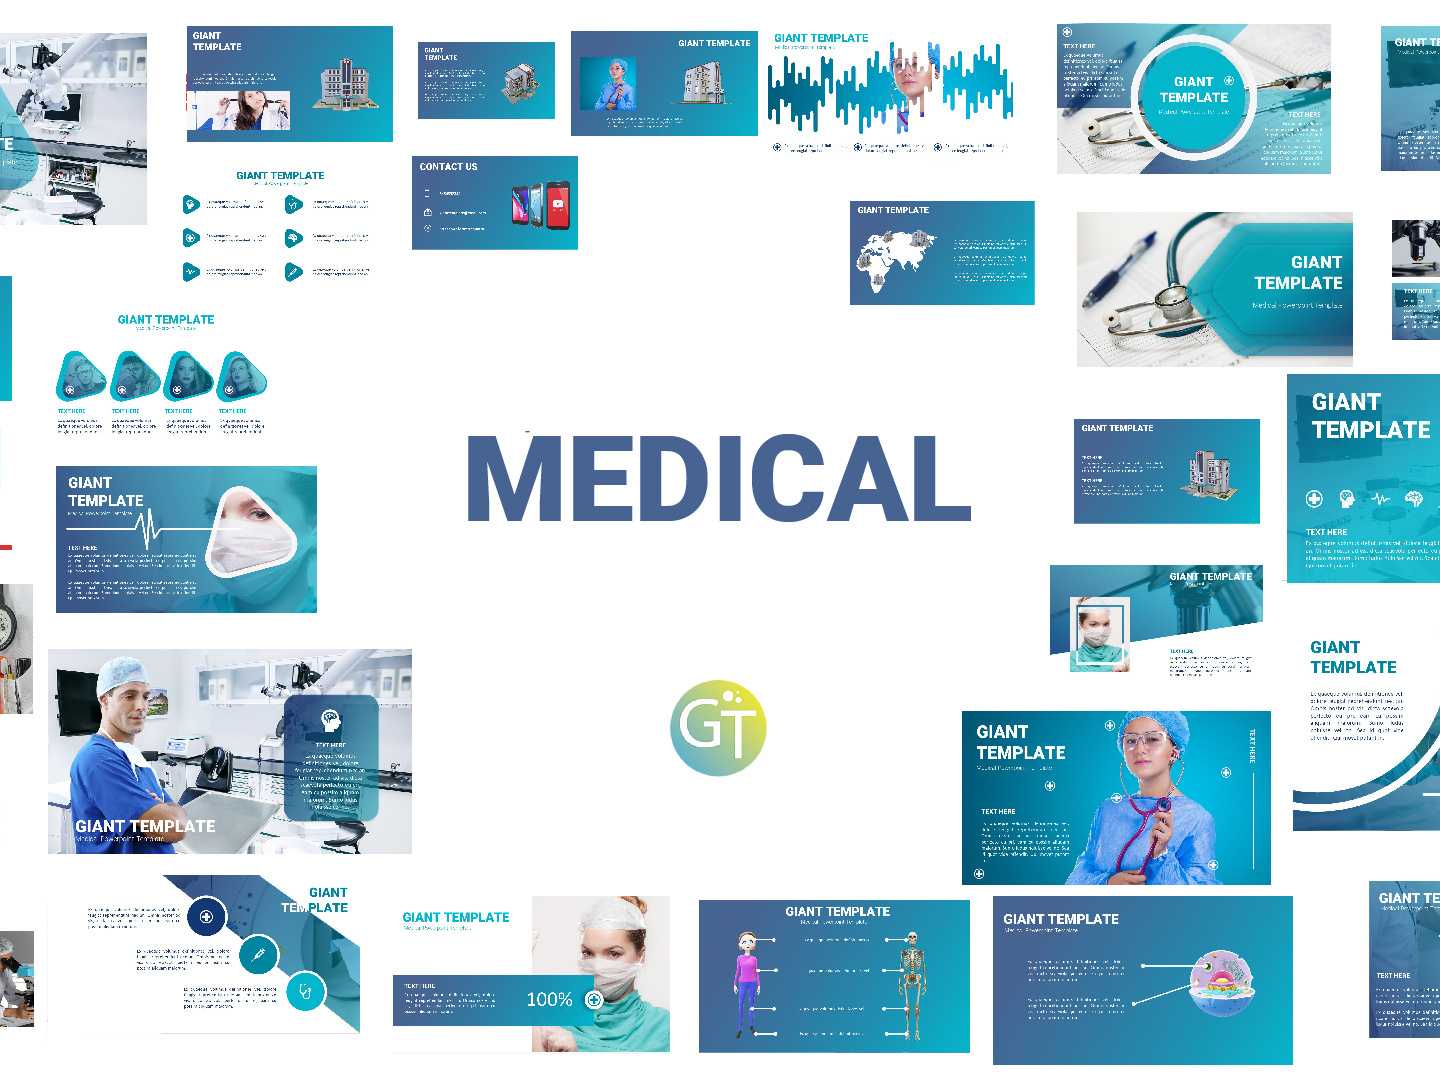 Medical Powerpoint Templates Free Downloadgiant Template Intended For Powerpoint Animation Templates Free Download